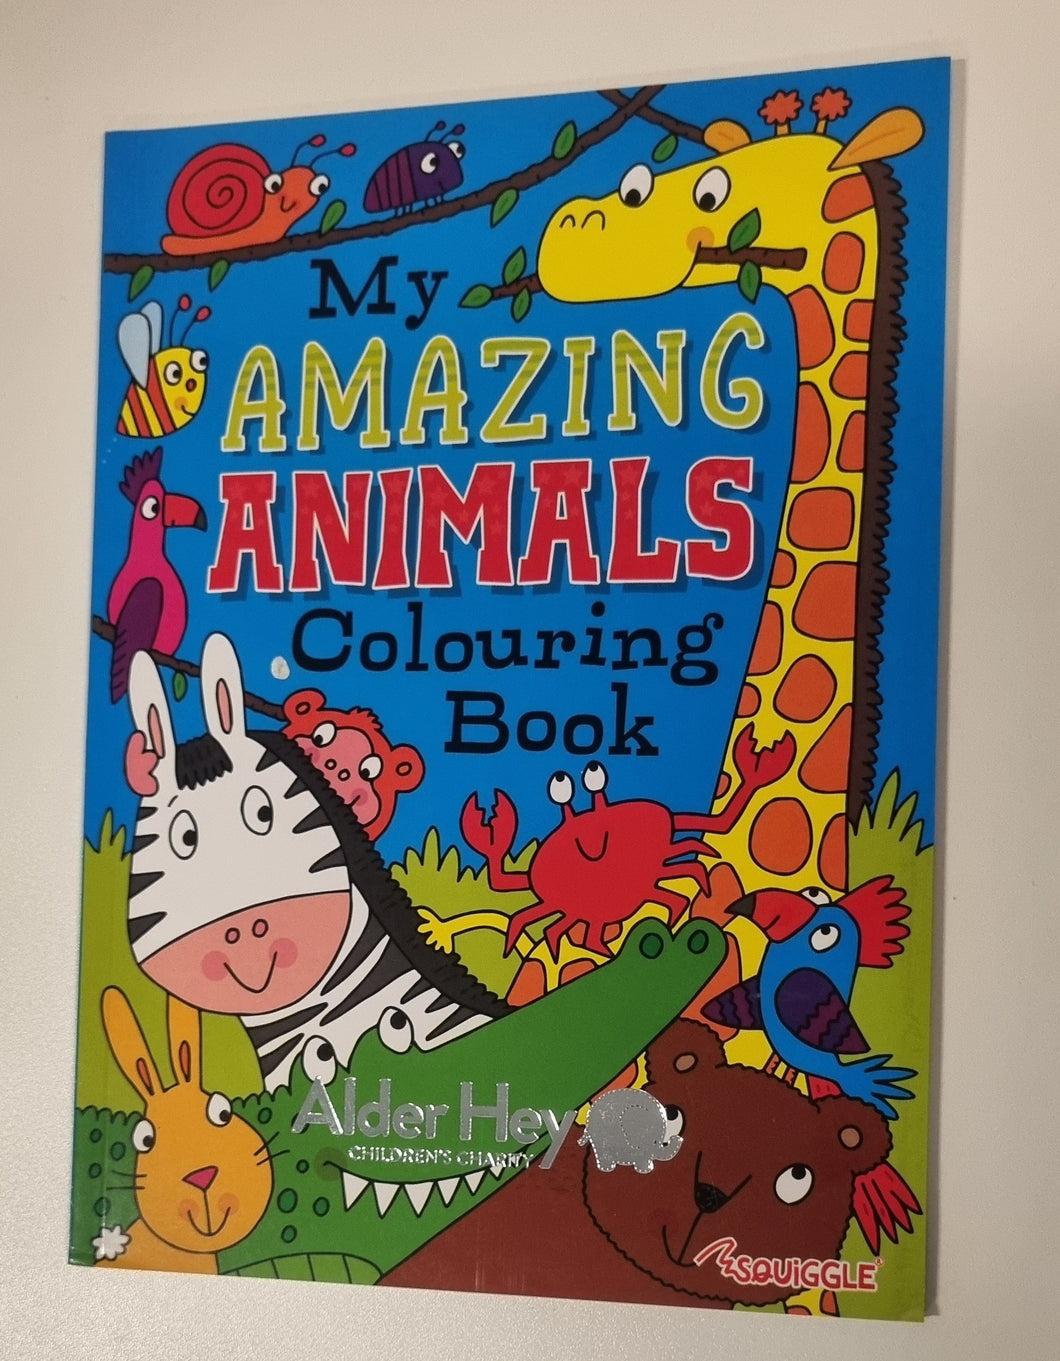 Children's Animal Themed Colouring Book